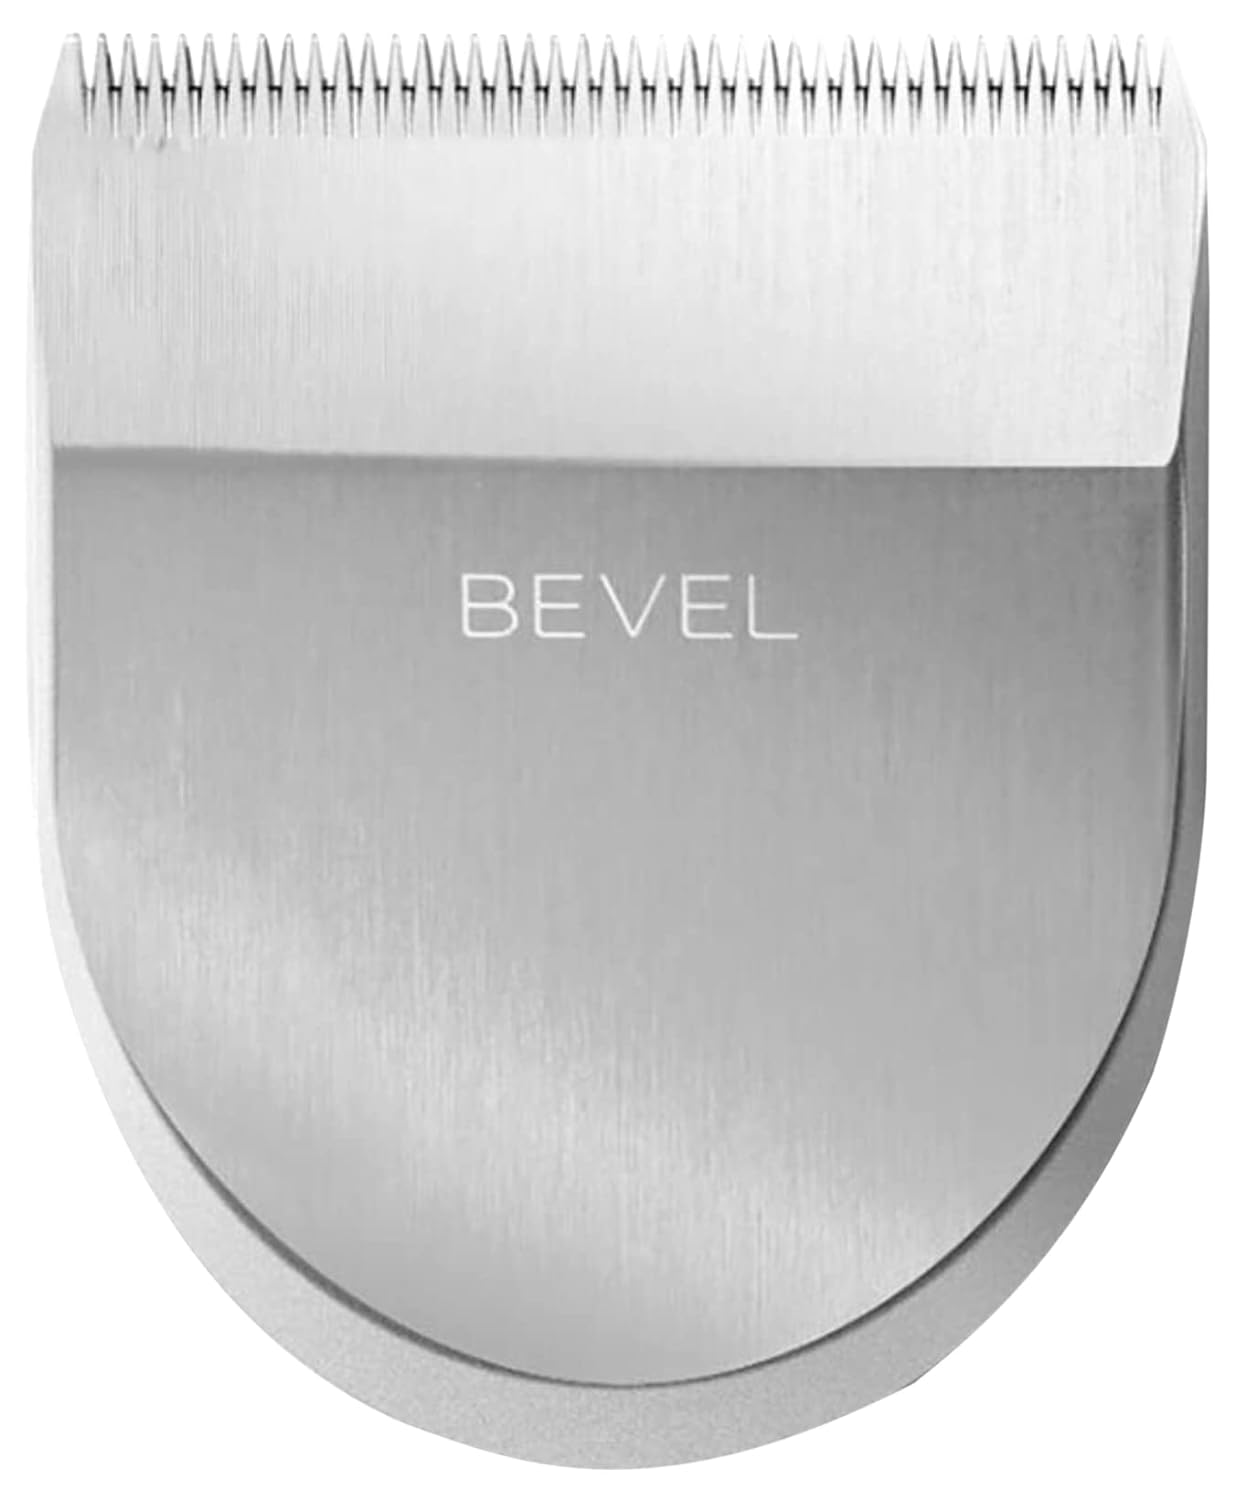 Bevel Square Trimmer Blade Attachment - Compatible with Bevel Trimmer Only, Beard Trimmer for Men, Mustache Trimmer, Cordless Face, Neck and Body Hair Trimmer Attachment Head - Silver, 1 Count